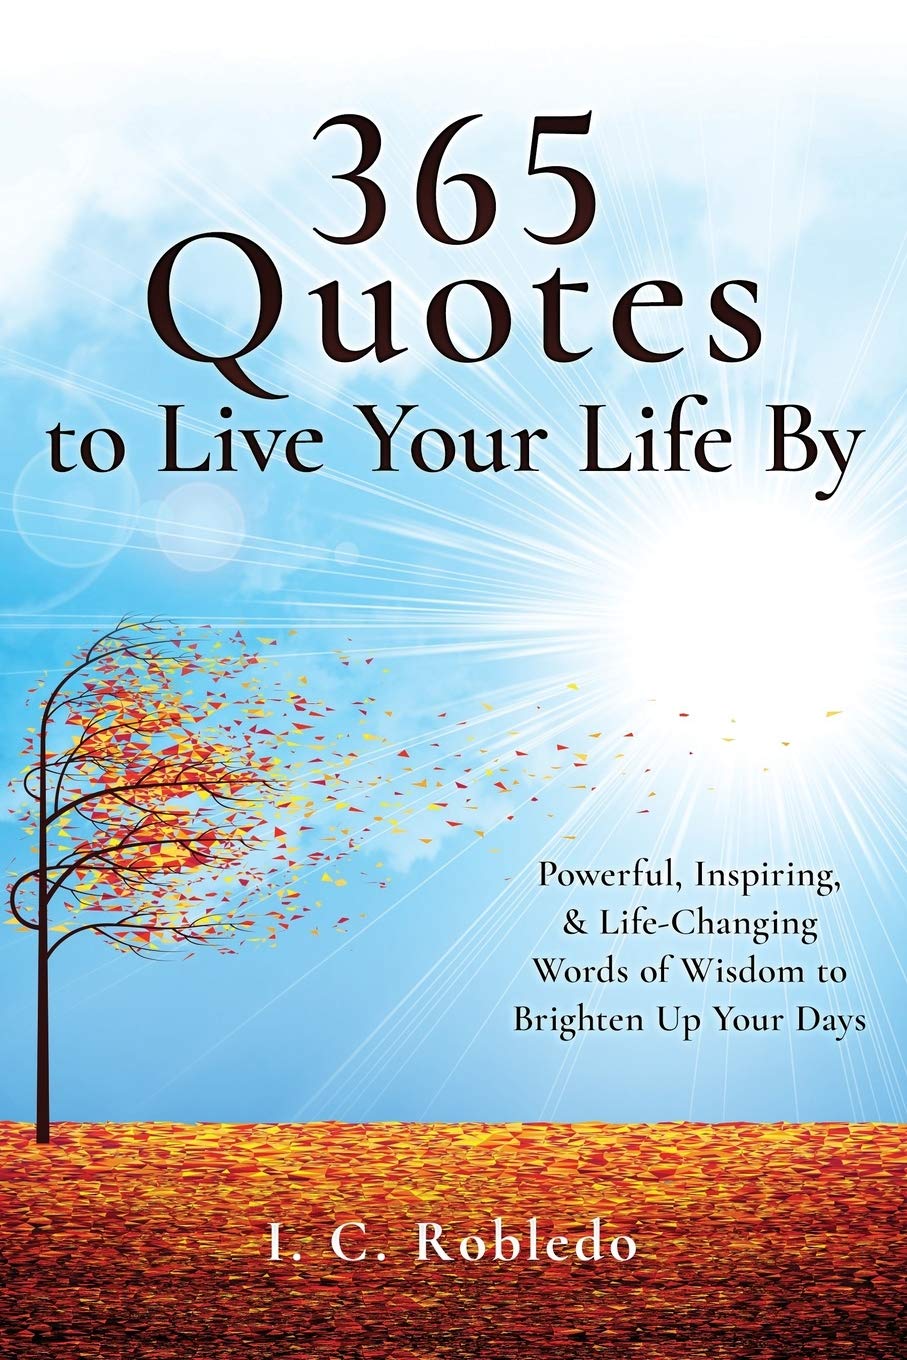 Quotes to Live Your Life By, Powerful, Inspiring, & Life Changing Words of Wisdom to Brighten Up Your Days